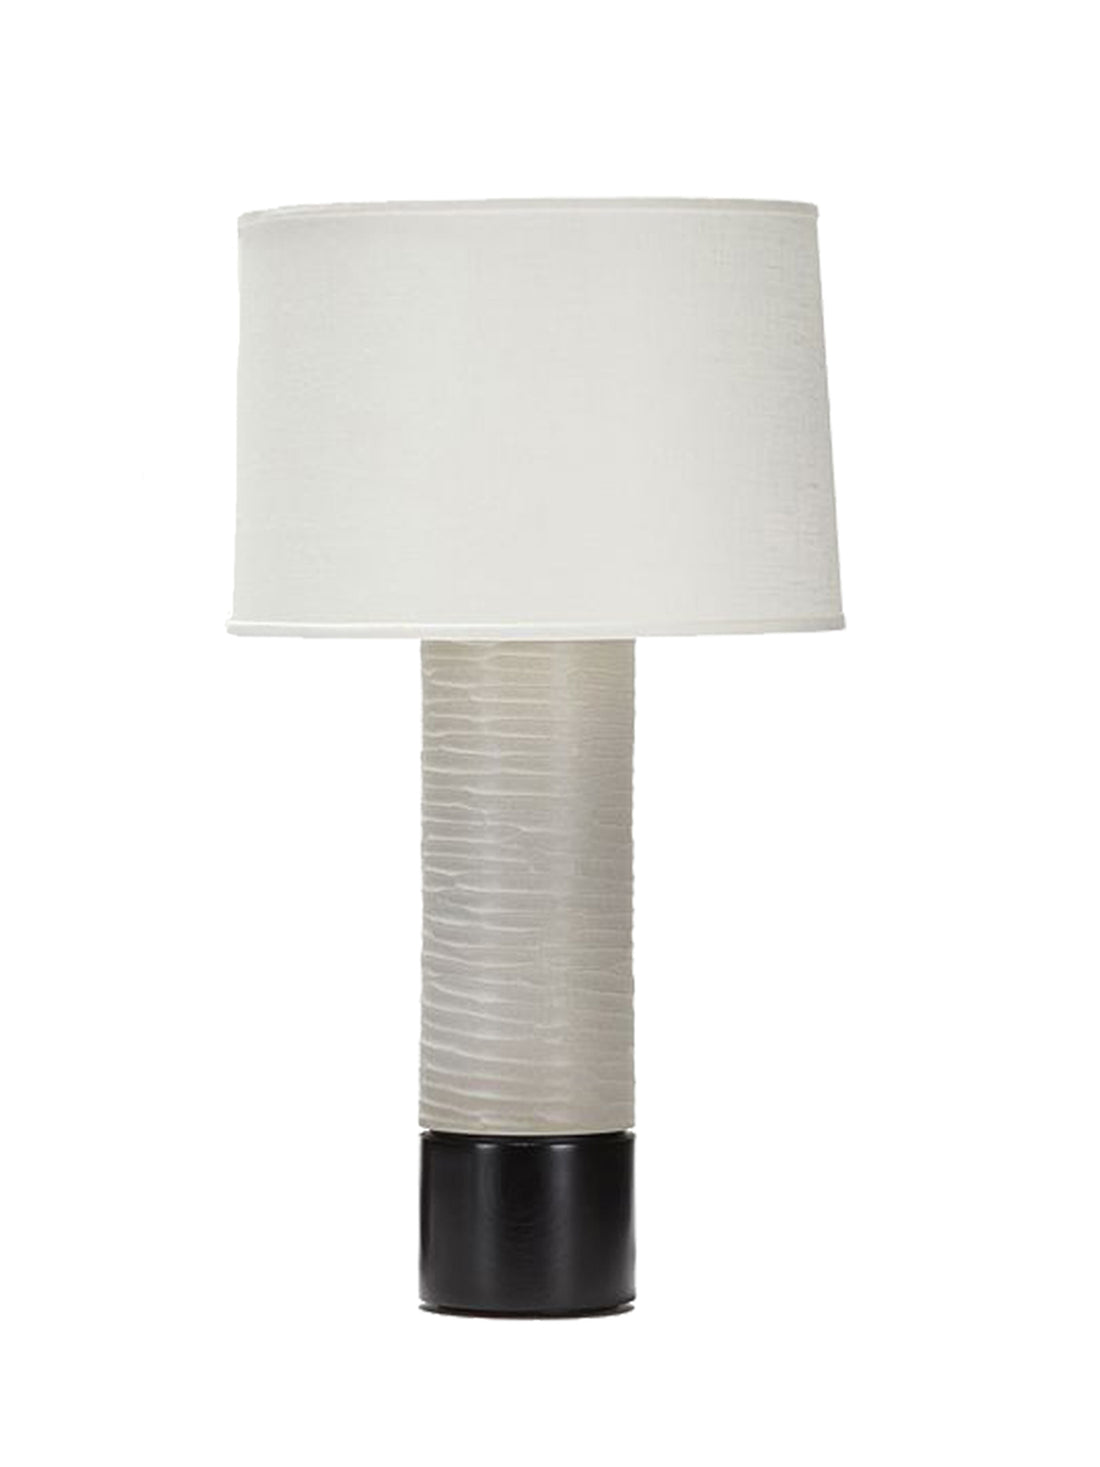 TALL BAXTER TABLE LAMP HAND-CARVED PALE CANYON